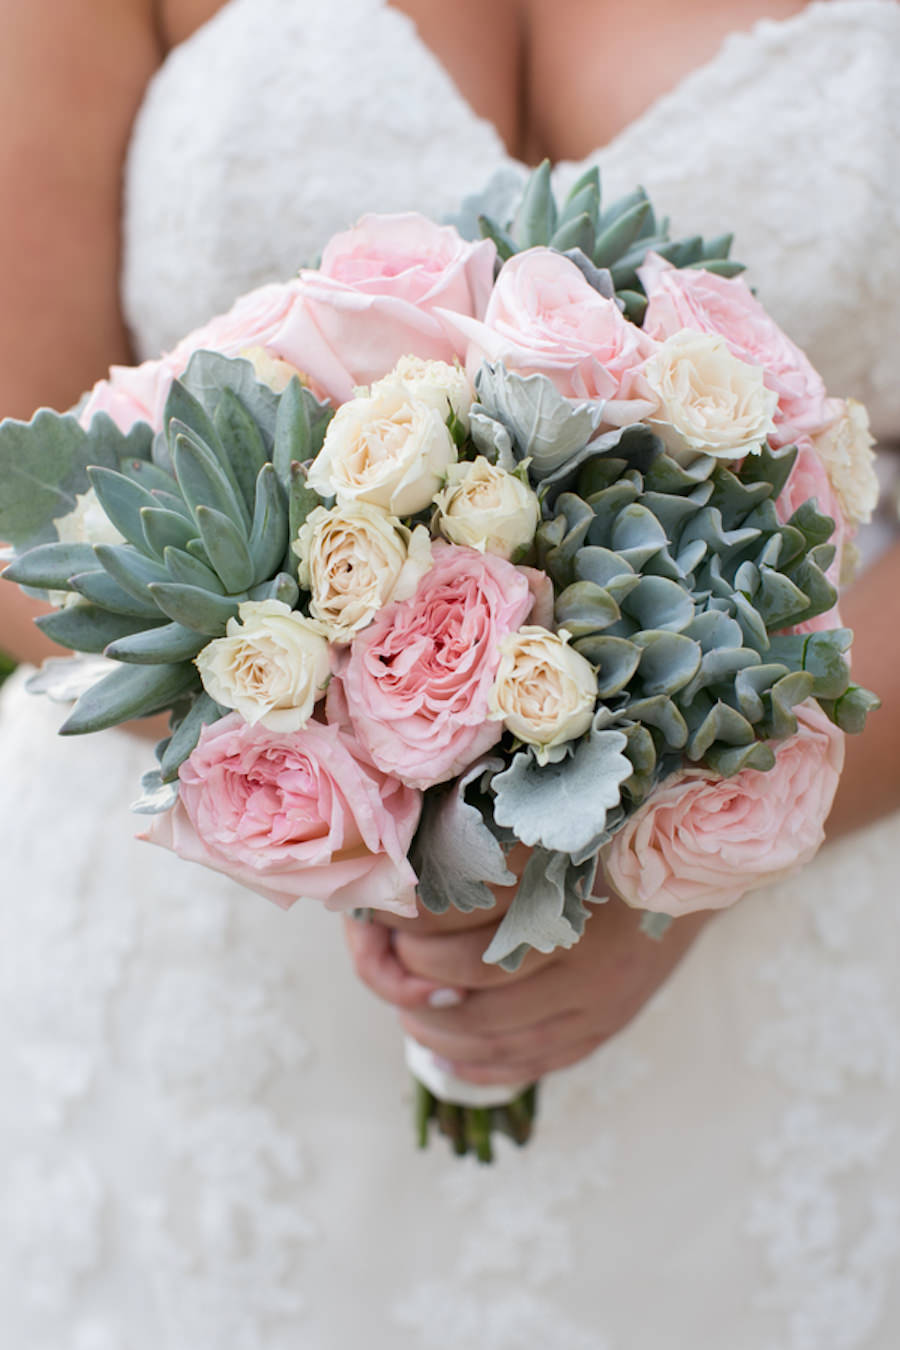 Blush Pink and Ivory Rose Wedding Bouquet with Greenery Succulents